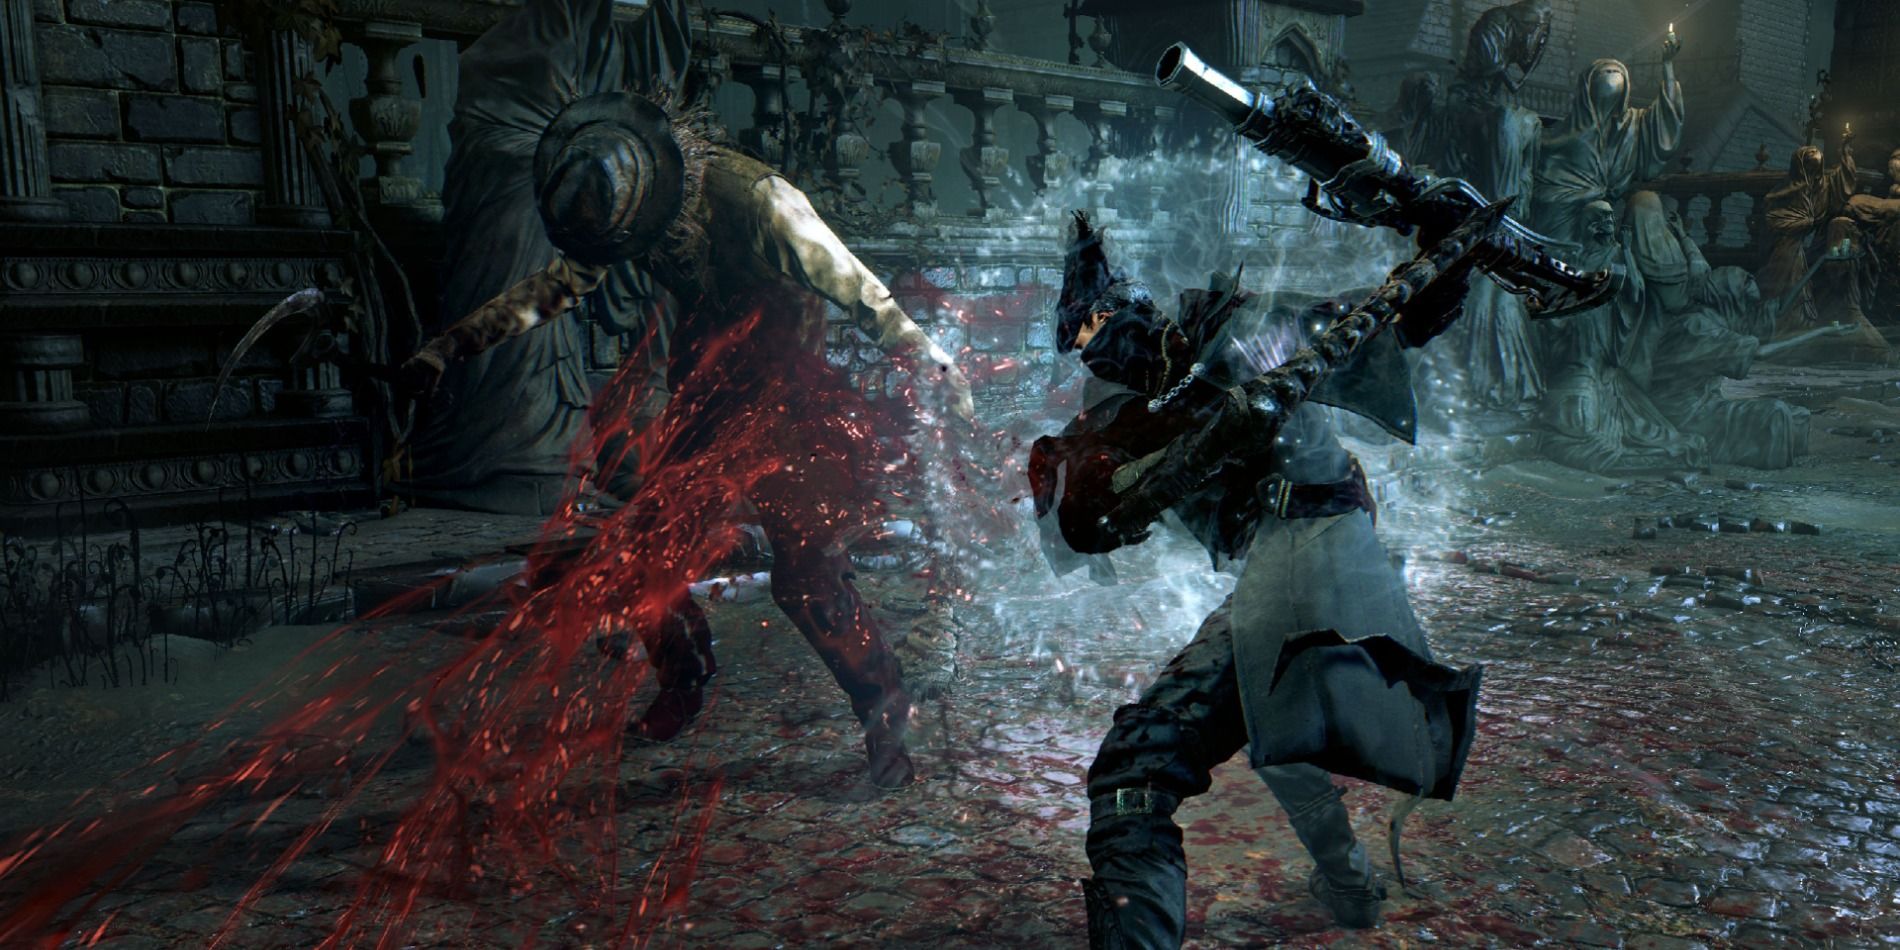 The Hunter fighting off a disease-ridden enemy in Bloodborne